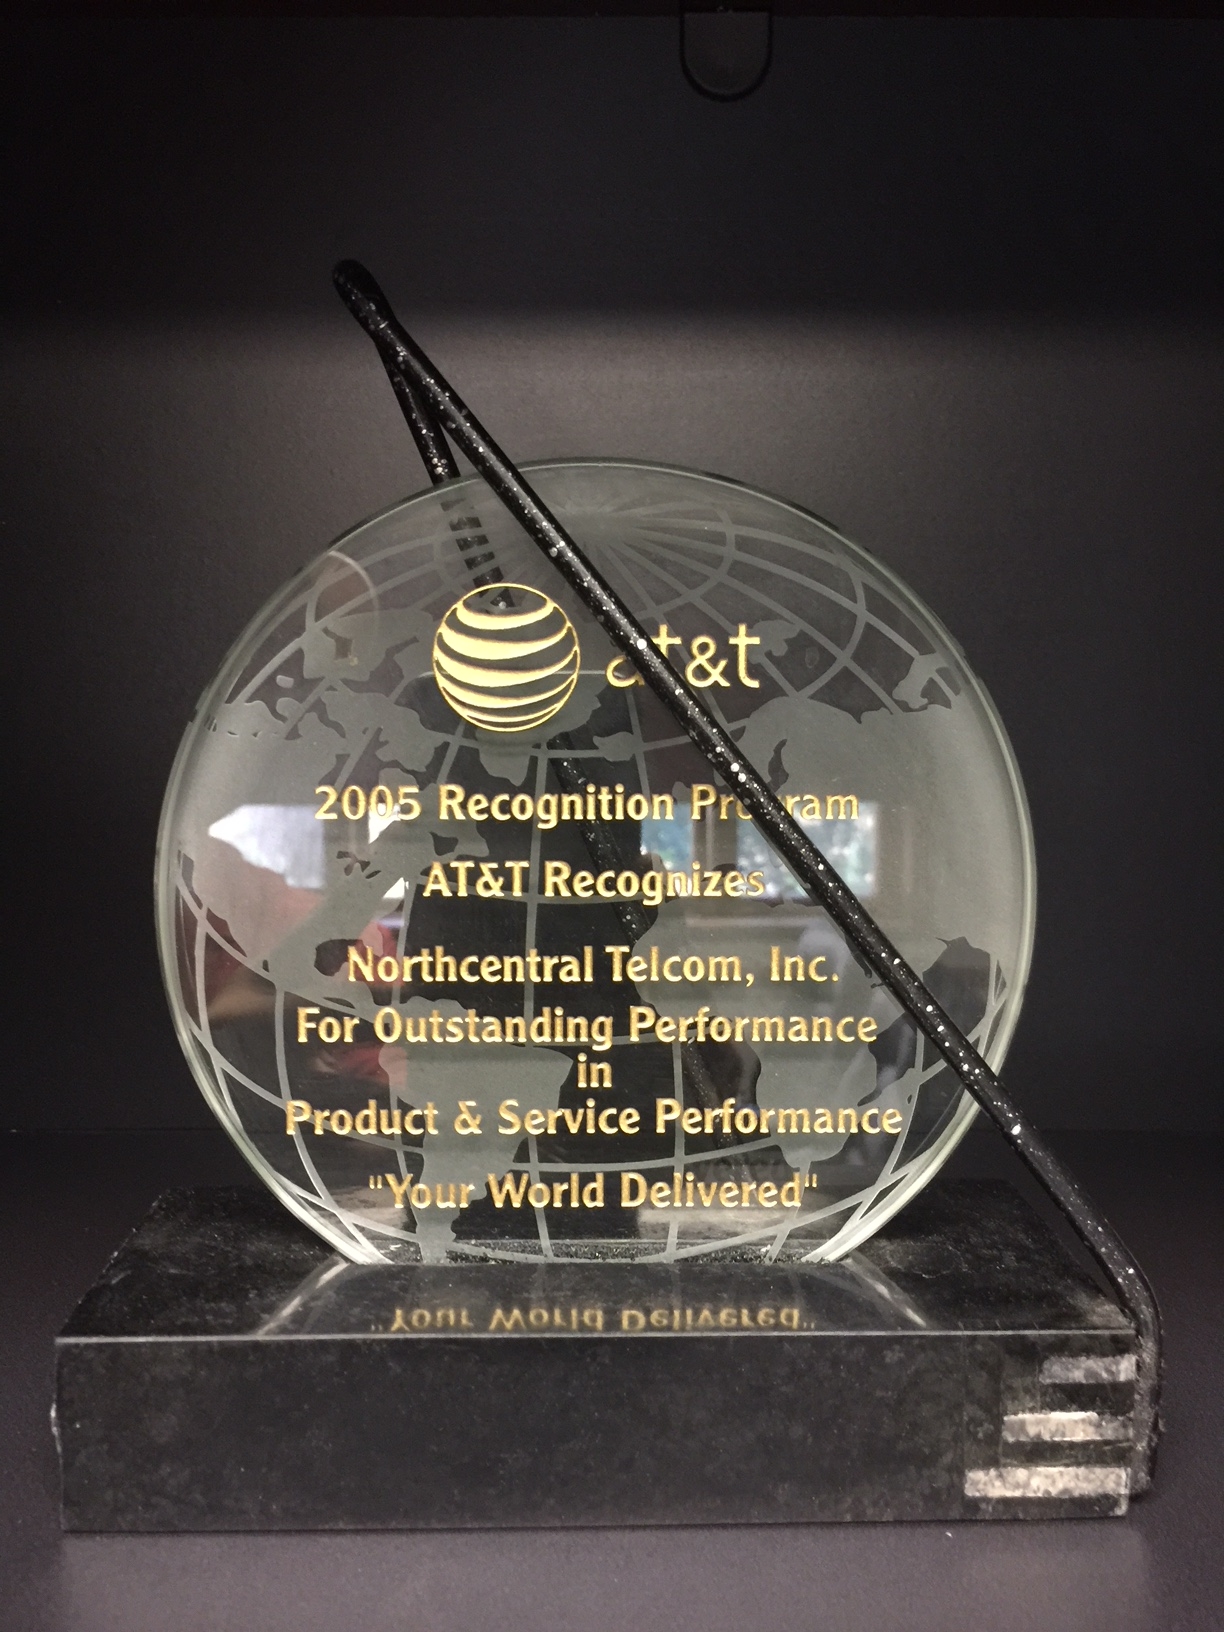 Northcentral Telcom, Inc. - AT&T 2005 Recognition Program